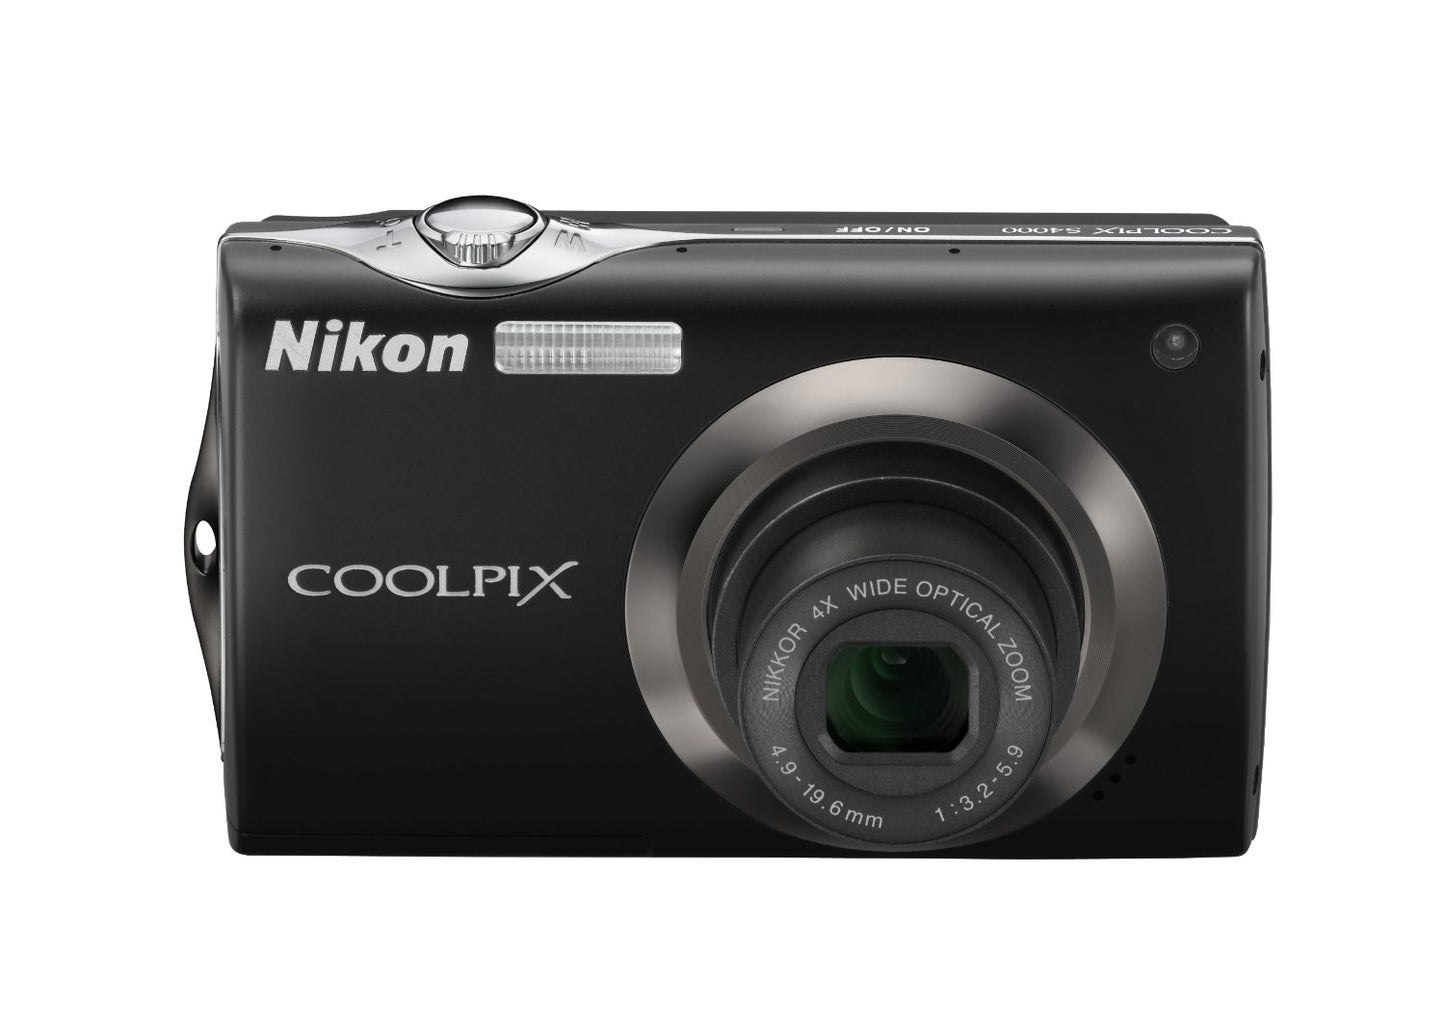 Nikon Coolpix S4000 12 MP Digital Camera with 4x Optical Vibration Reduction (VR) Zoom and 3.0-Inch Touch-Panel LCD (Black) - worldtradesolution.com
 - 6